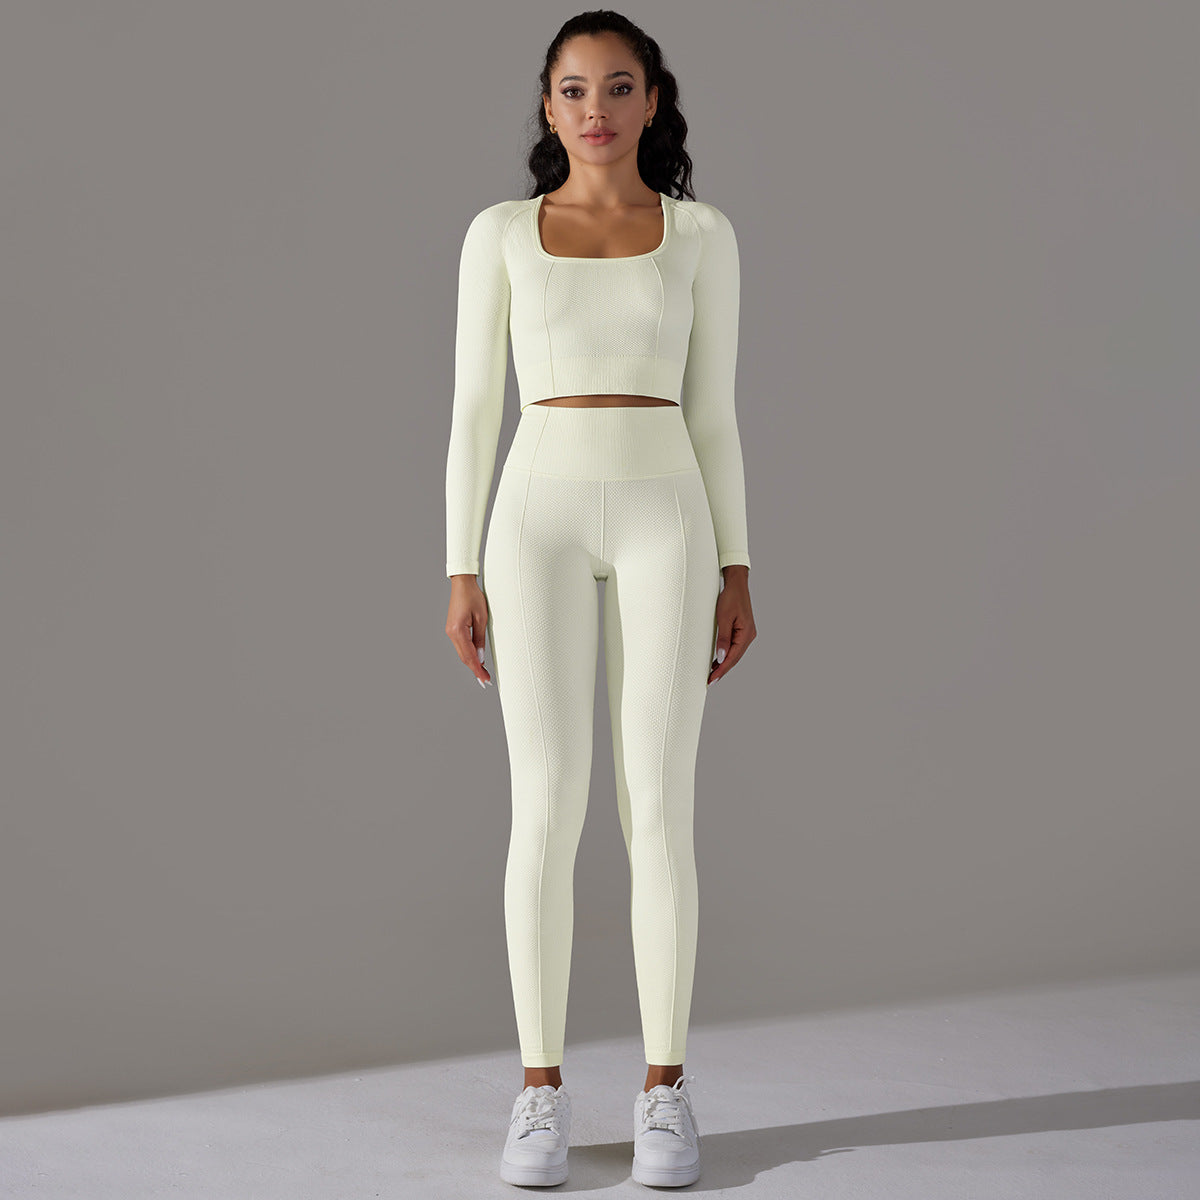 BamBam Seamless Knitting Solid Color Jacquard Low-Cut Tight Fitting Long-Sleeved Yoga Suit Sports Fitness Two-Piece Set - BamBam